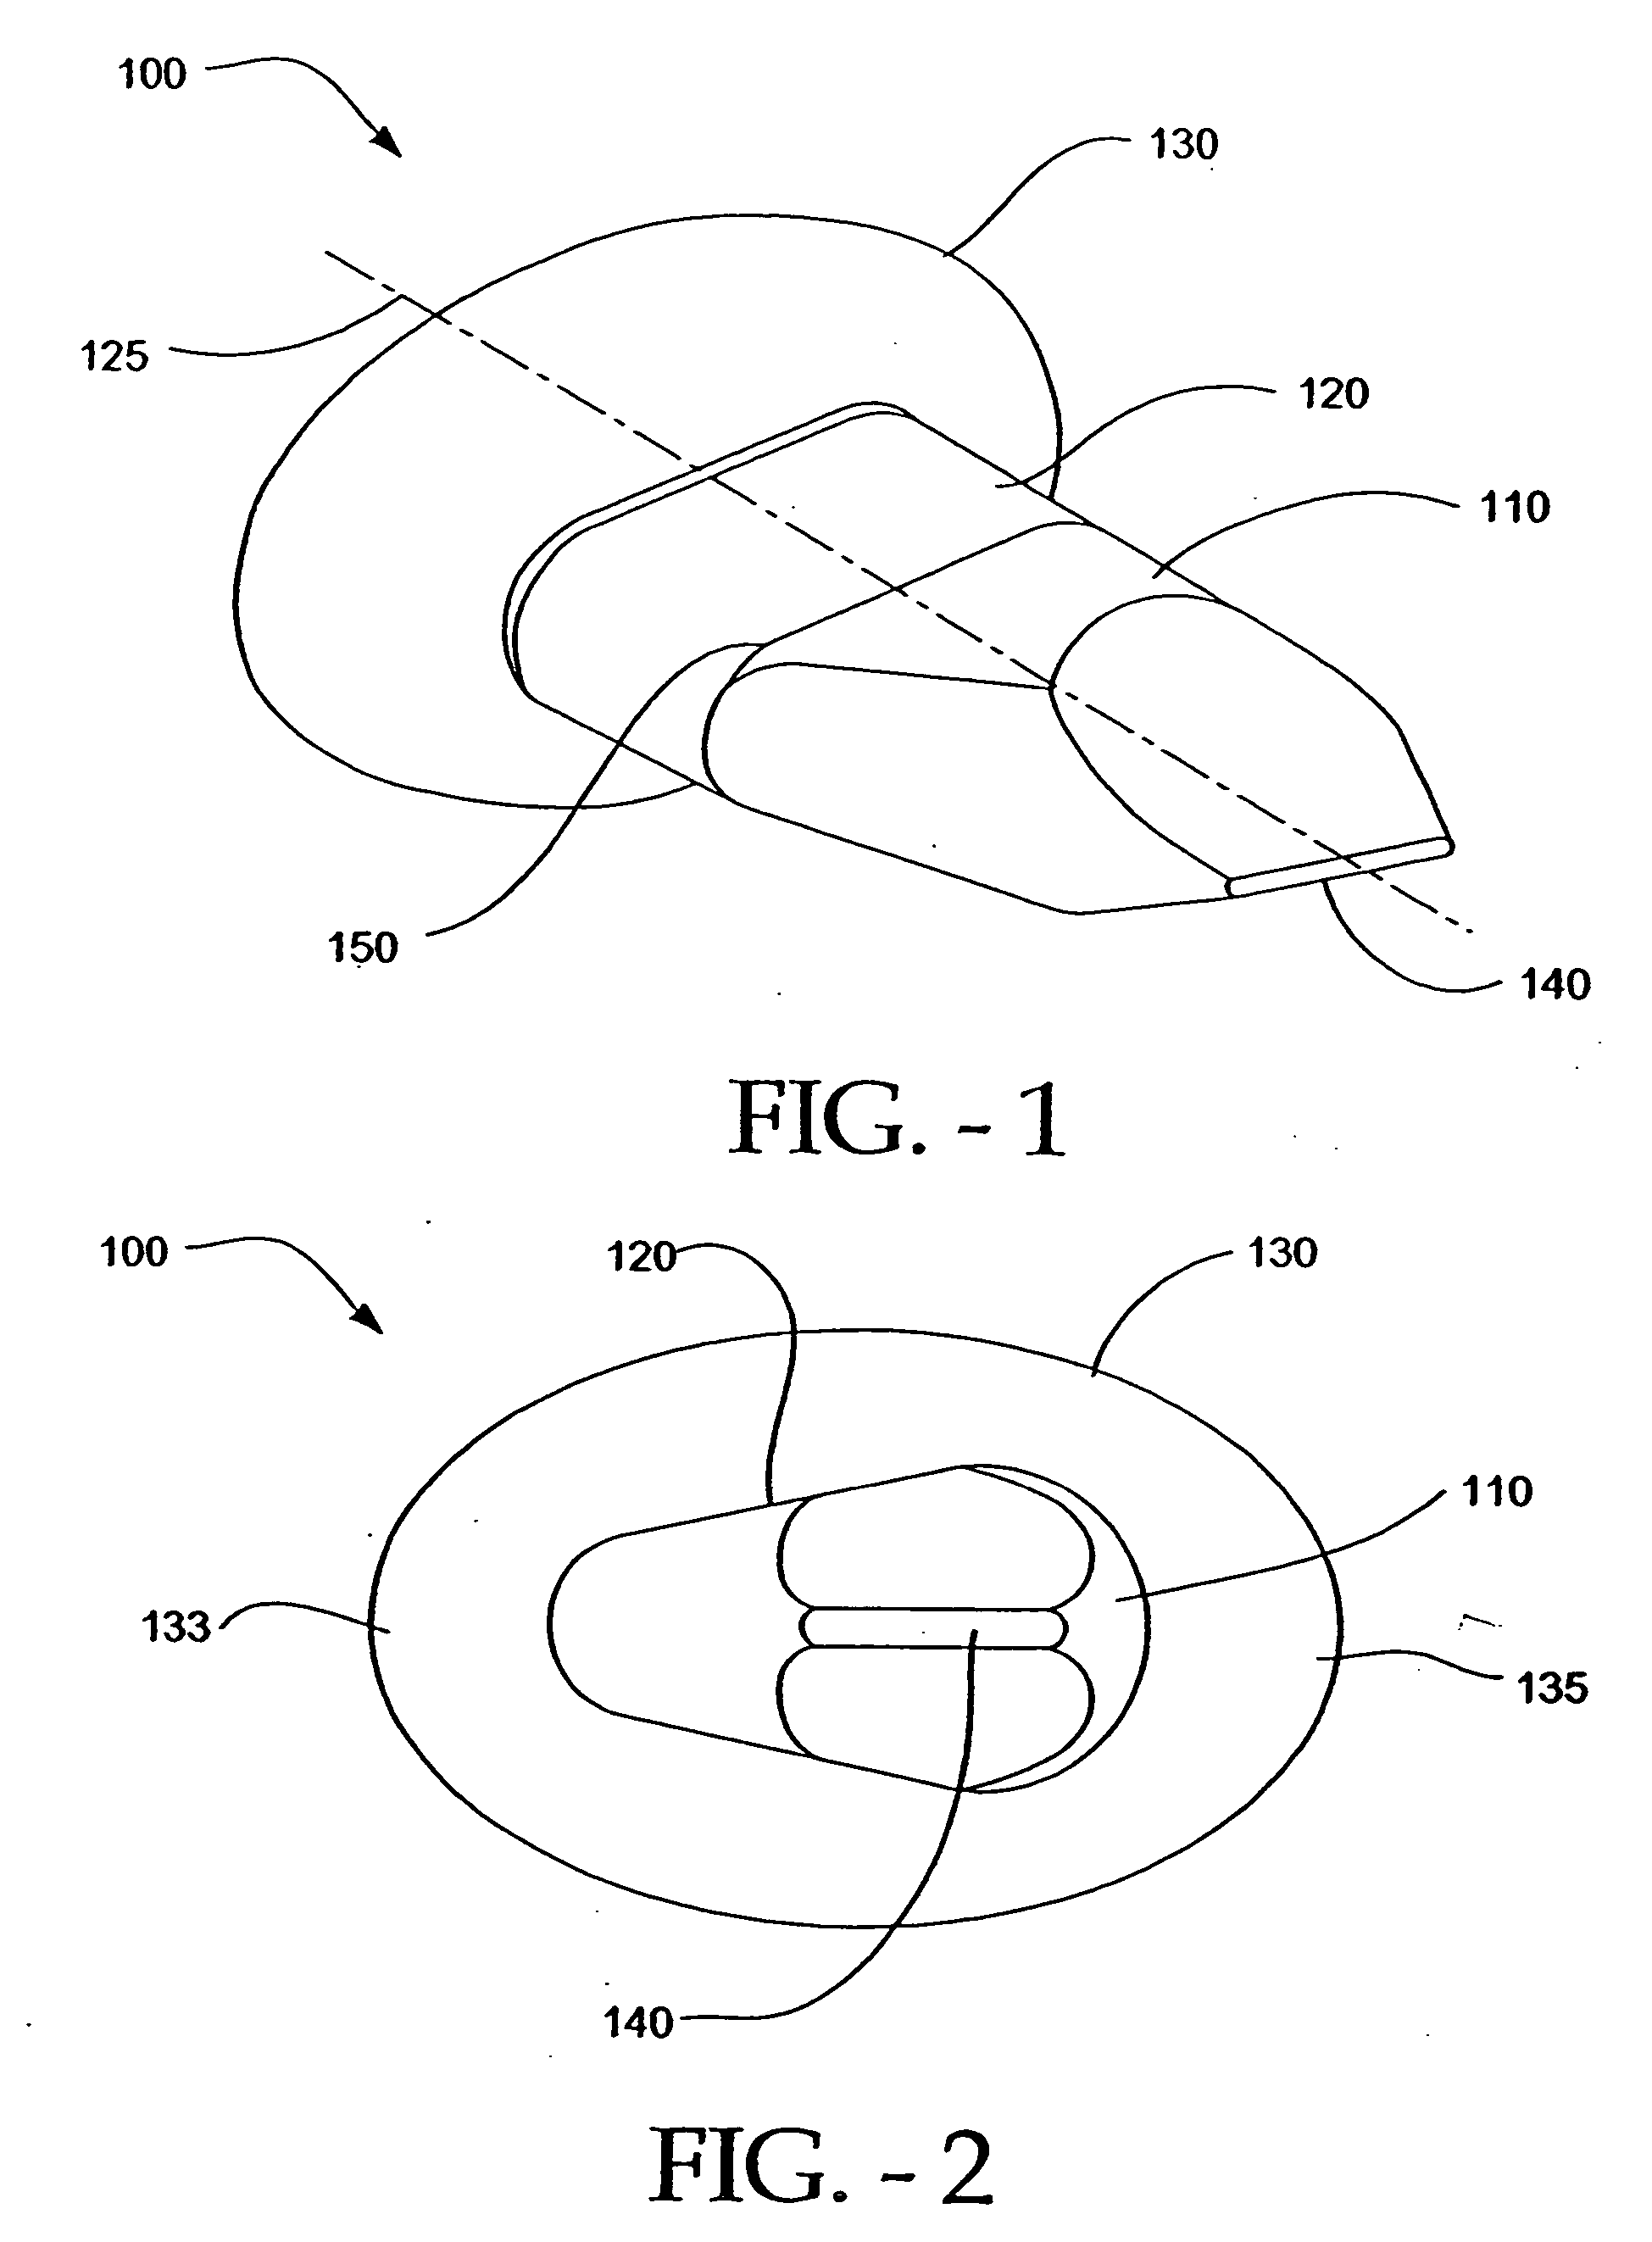 Interspinous process implant with slide-in distraction piece and method of implantation